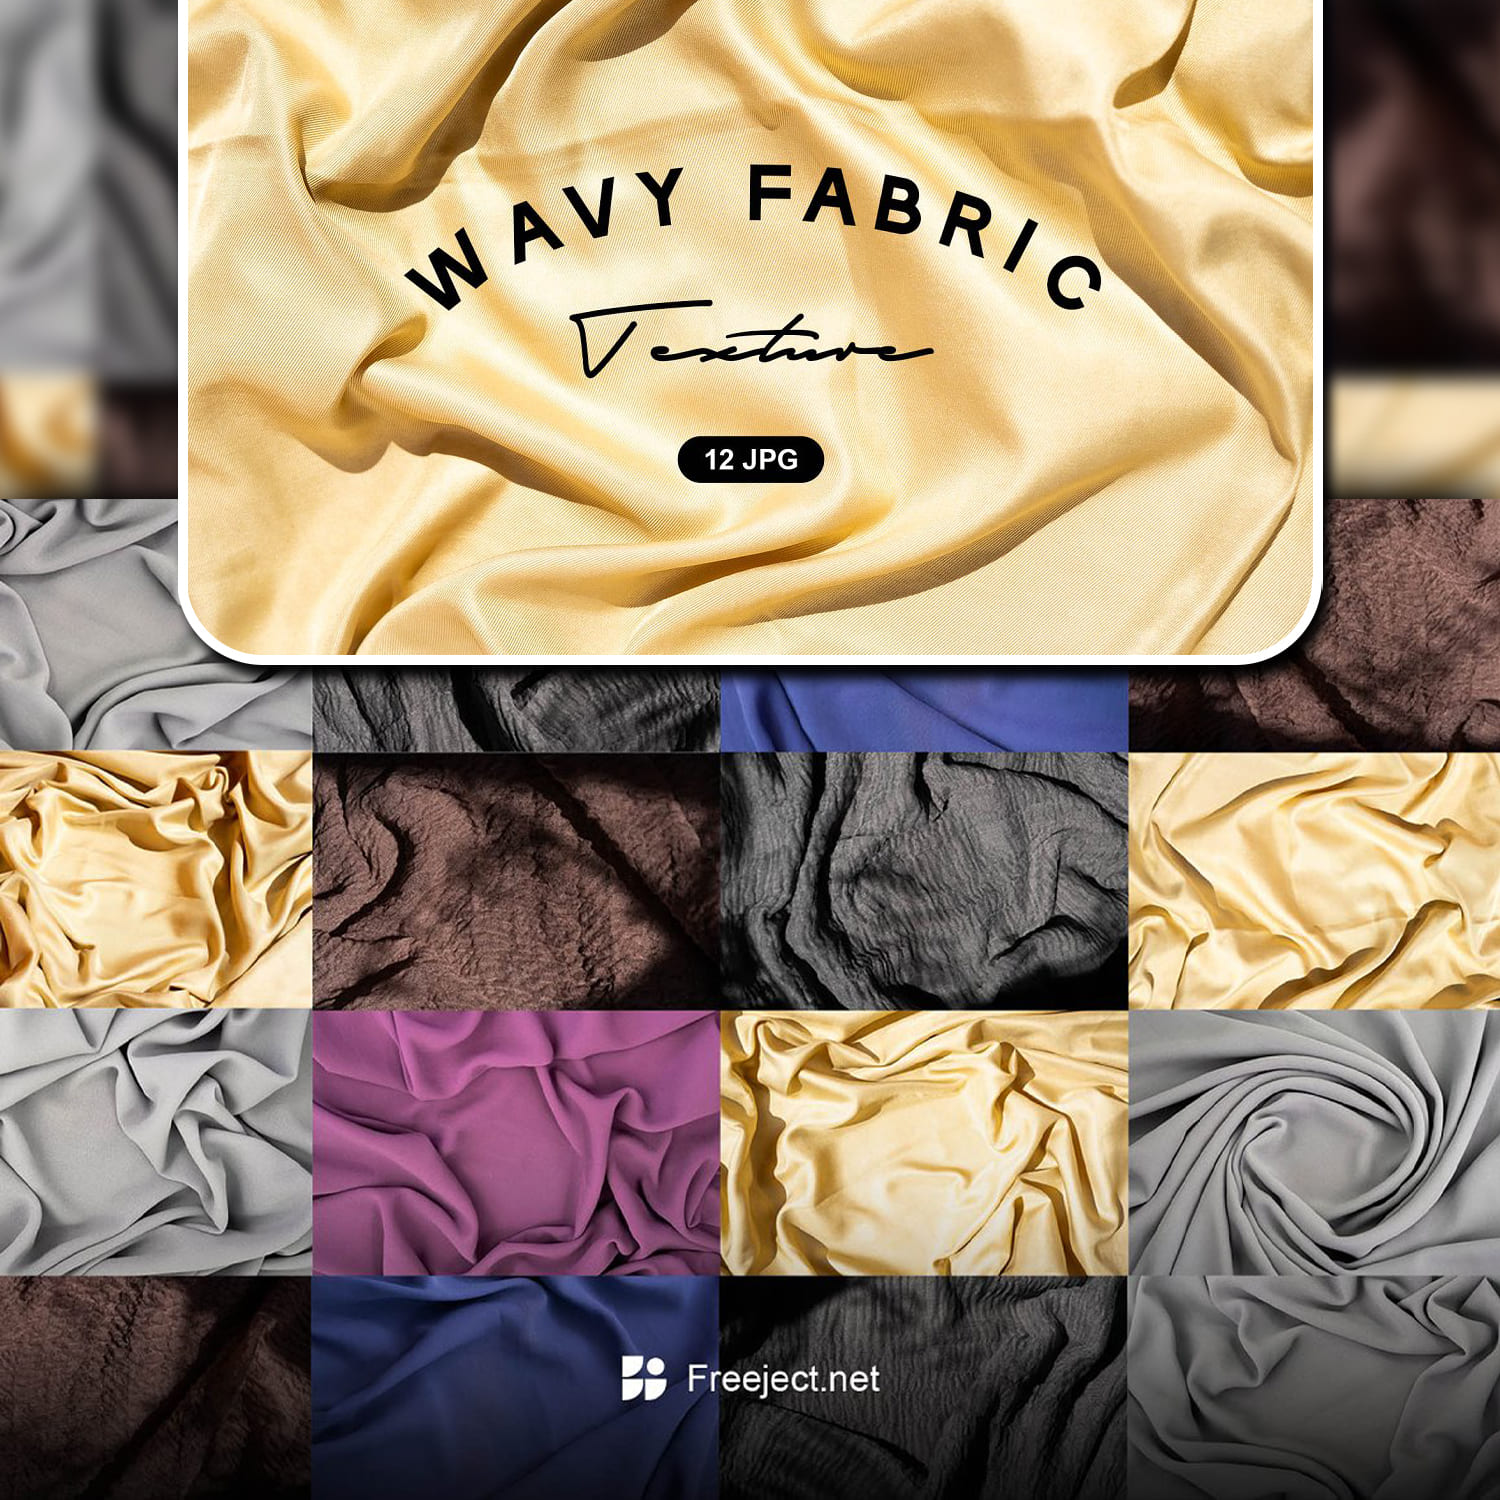 Wavy Fabric Texture Background created by freeject.net.